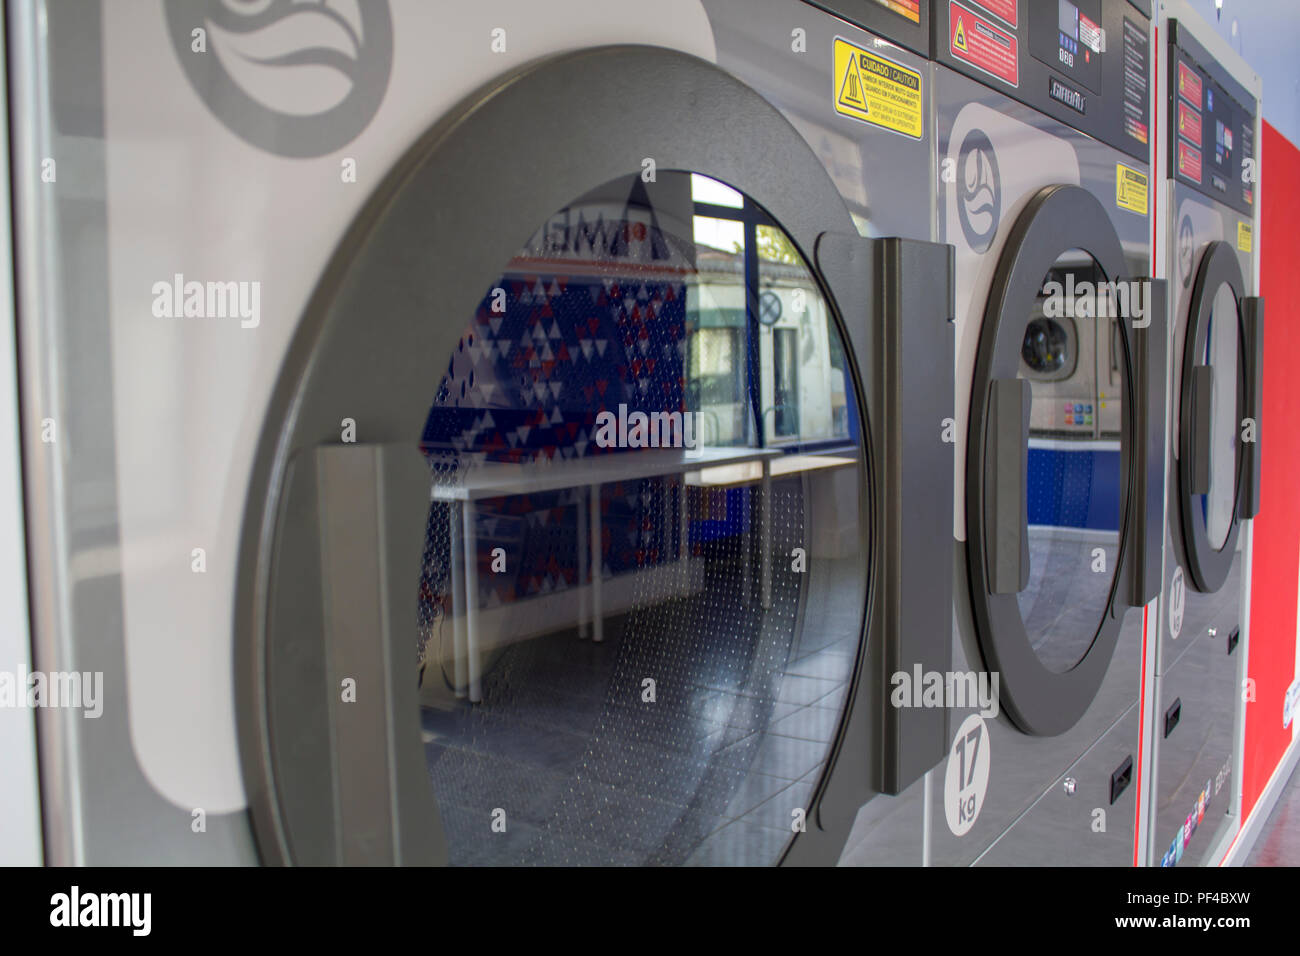 Washing machines in the self service laundry Stock Photo